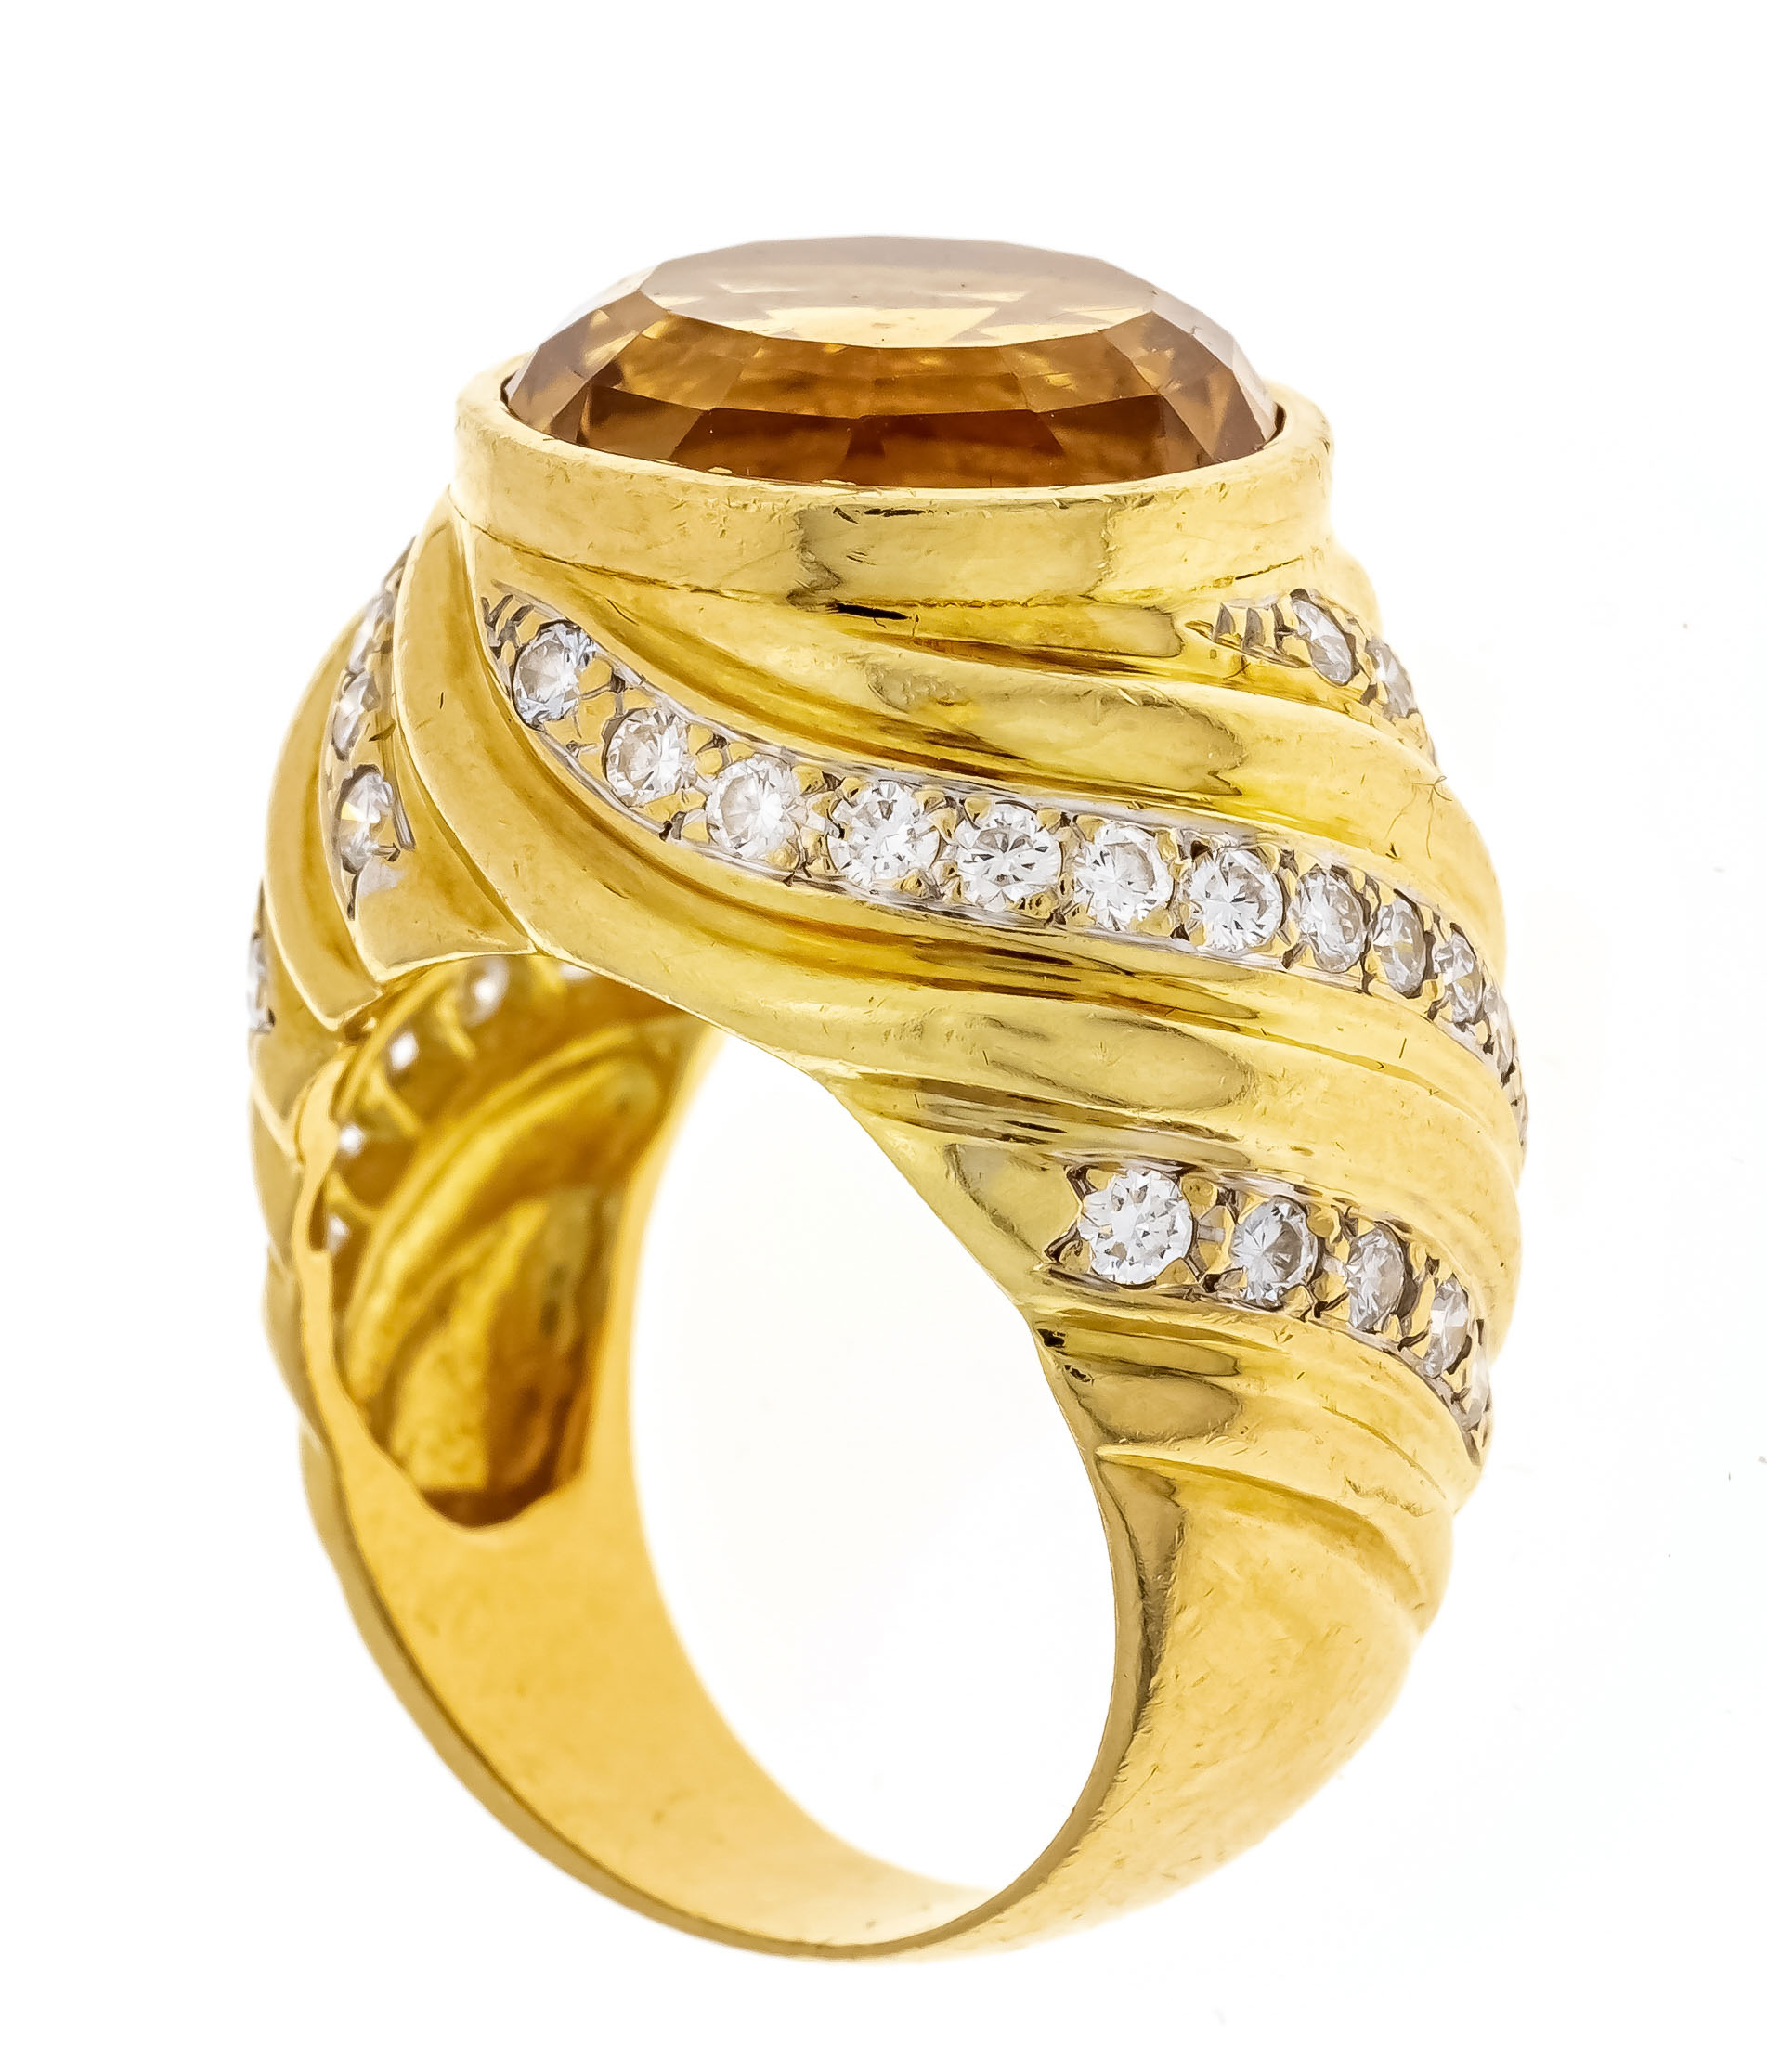 Citrine-cut diamond ring GG 750/000 with one round faceted citrine 13.5 mm, brownish yellow- - Image 2 of 2